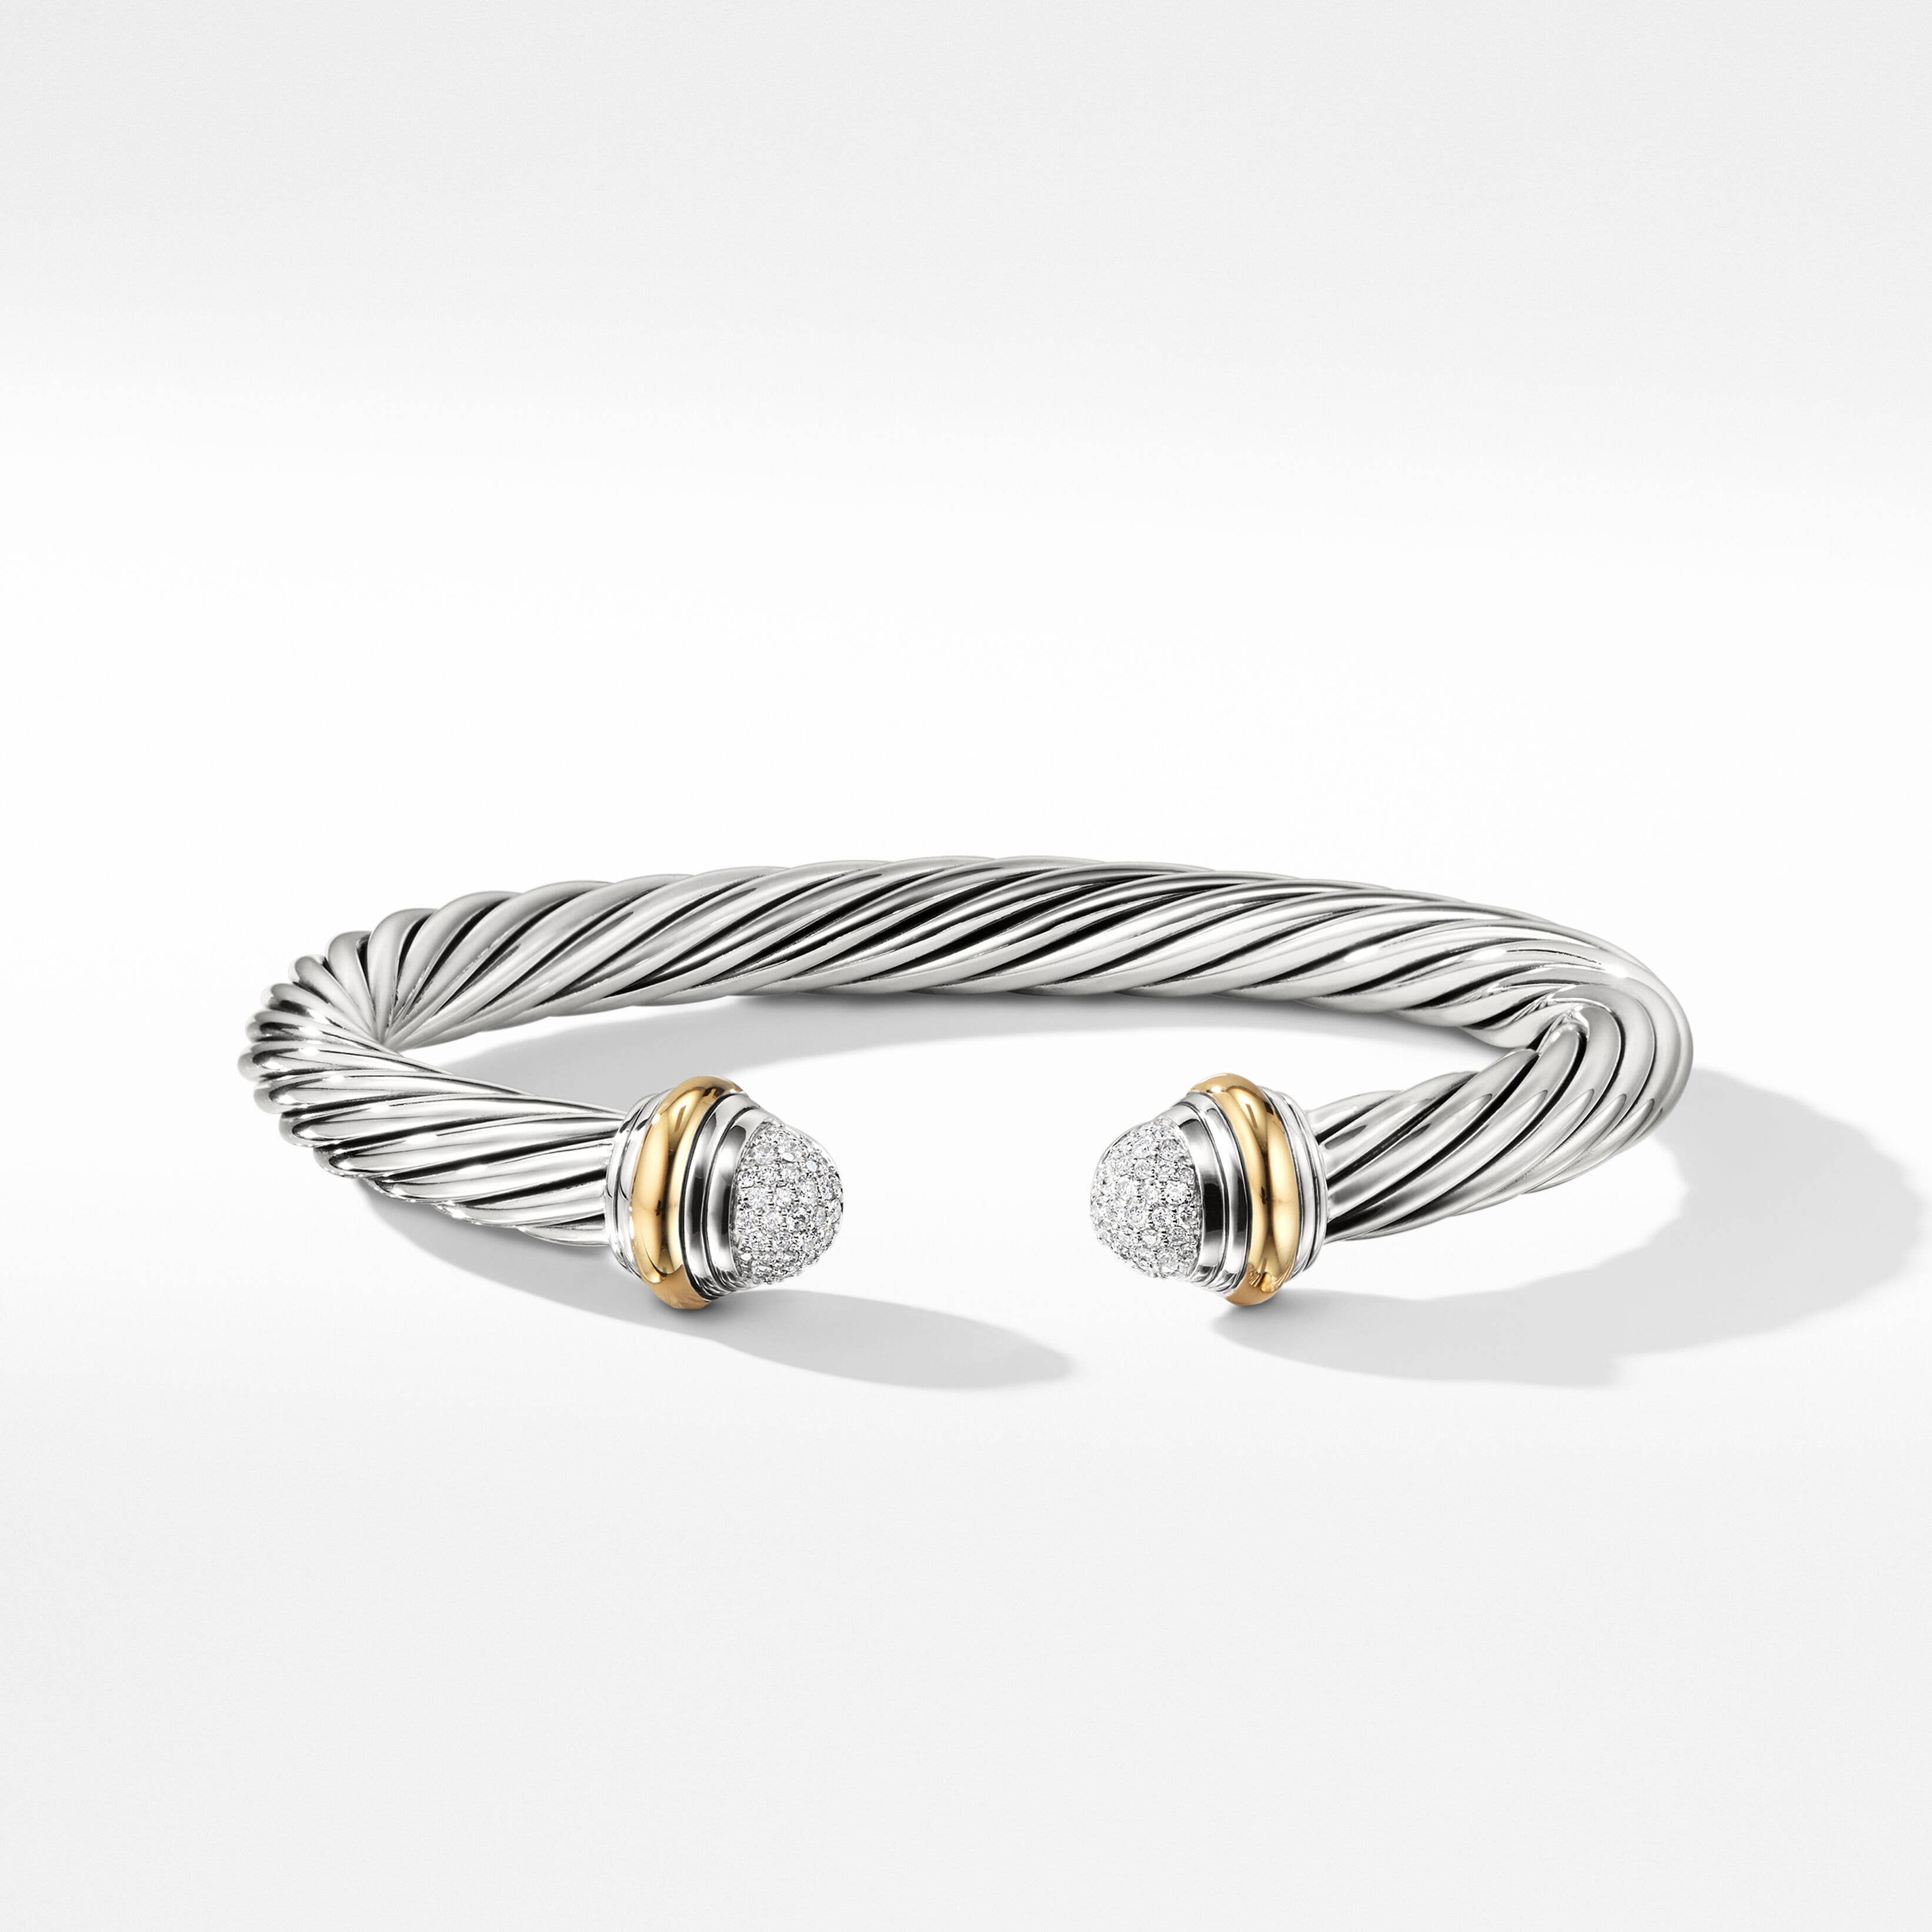 Cable Classics Bracelet in Sterling Silver with Pavé Diamond Domes and 18K Yellow Gold